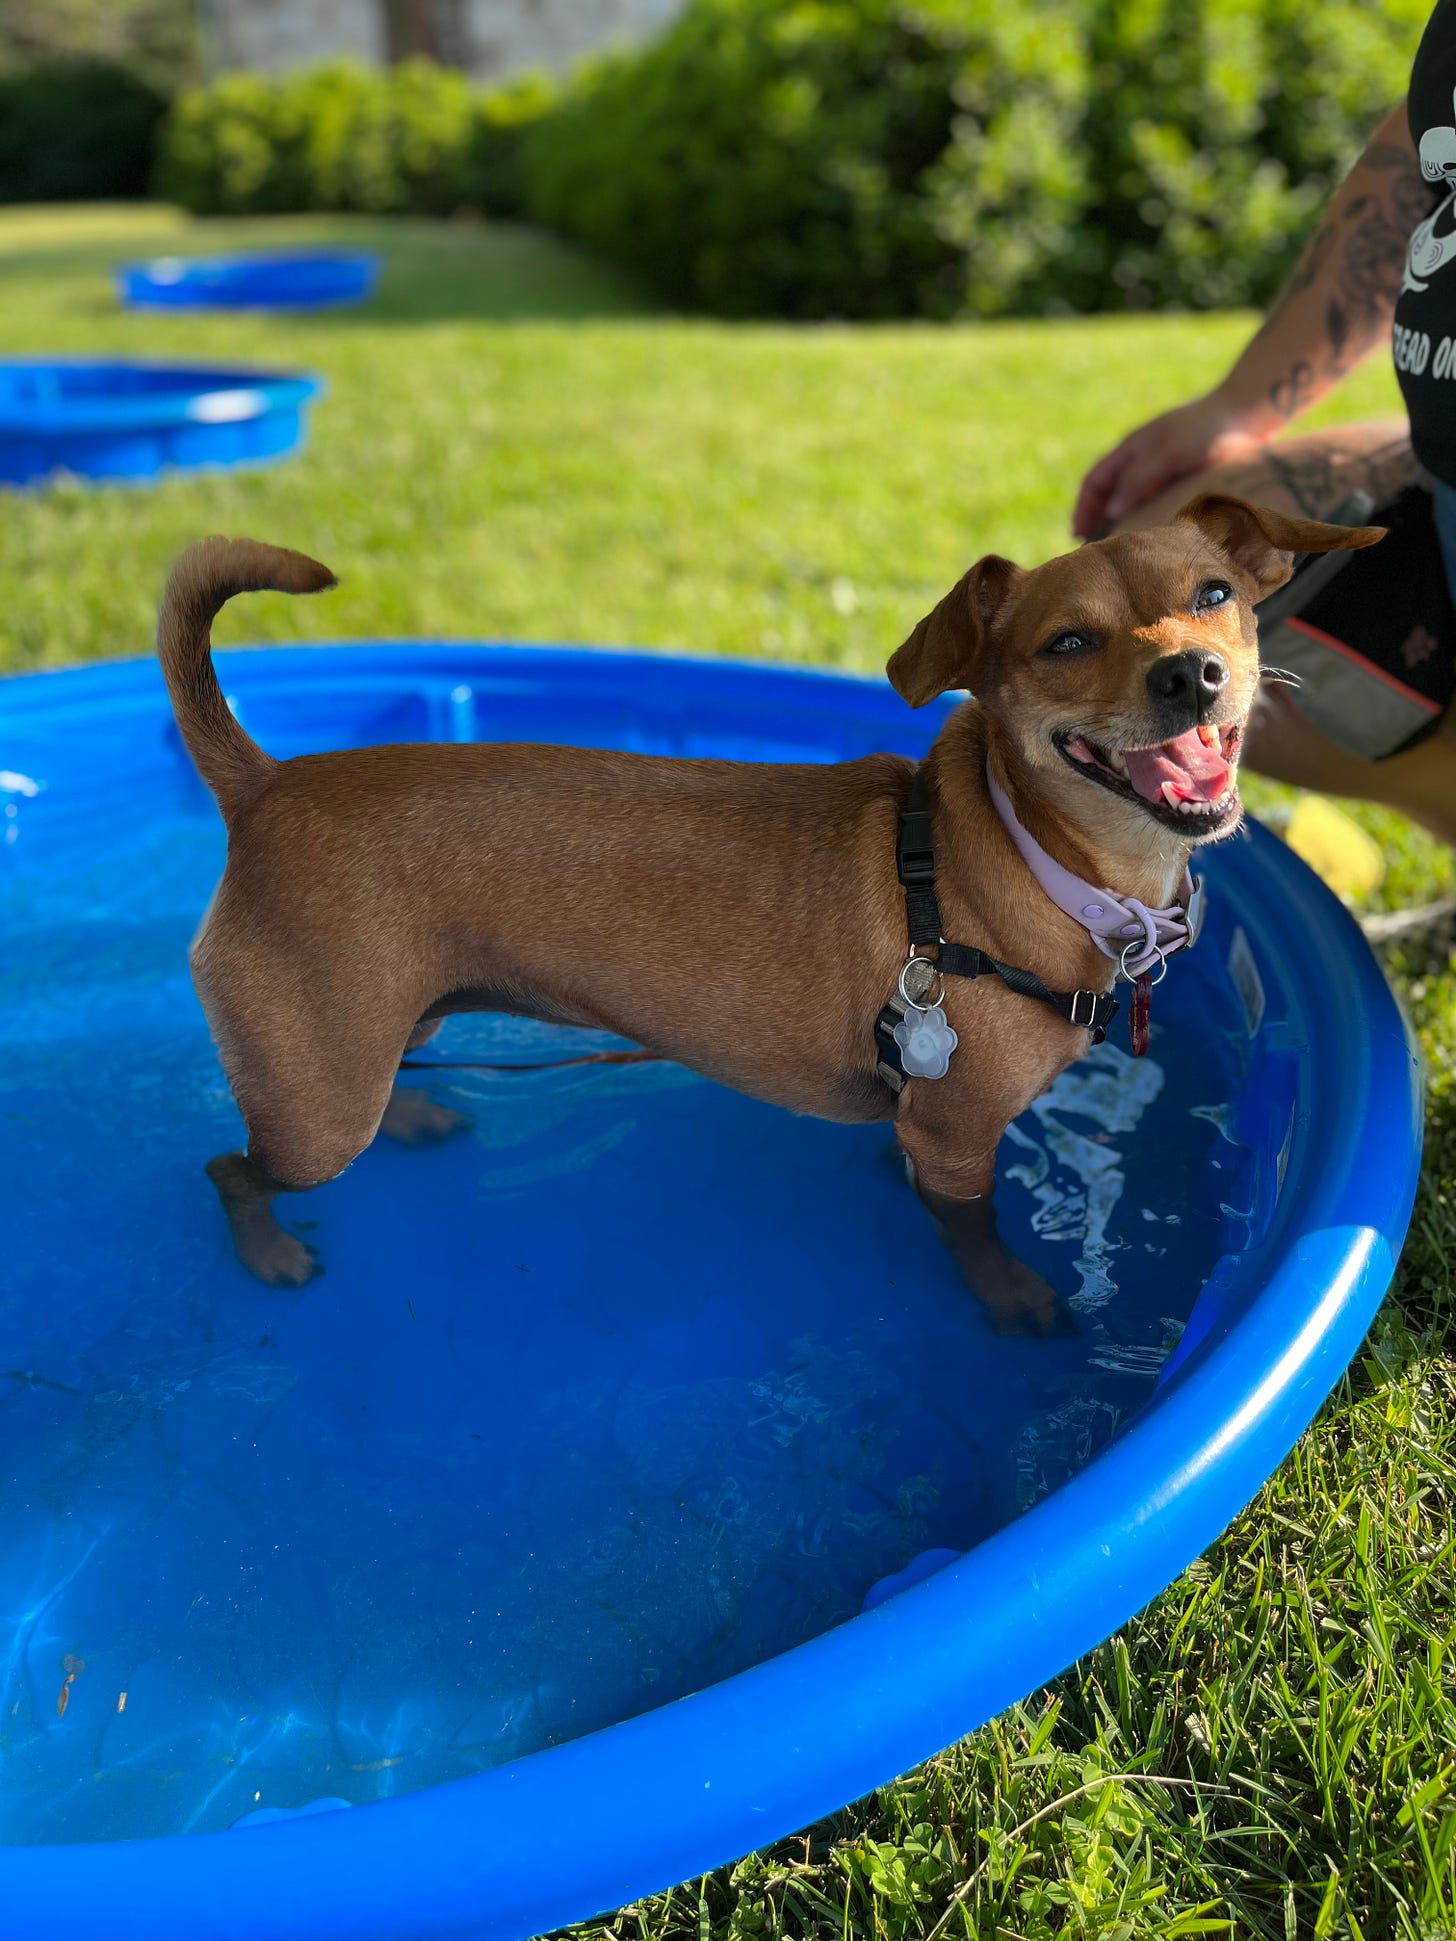 A picture of scout, a small reddish brown dog smiling at the camera in a kid-size plastic pool